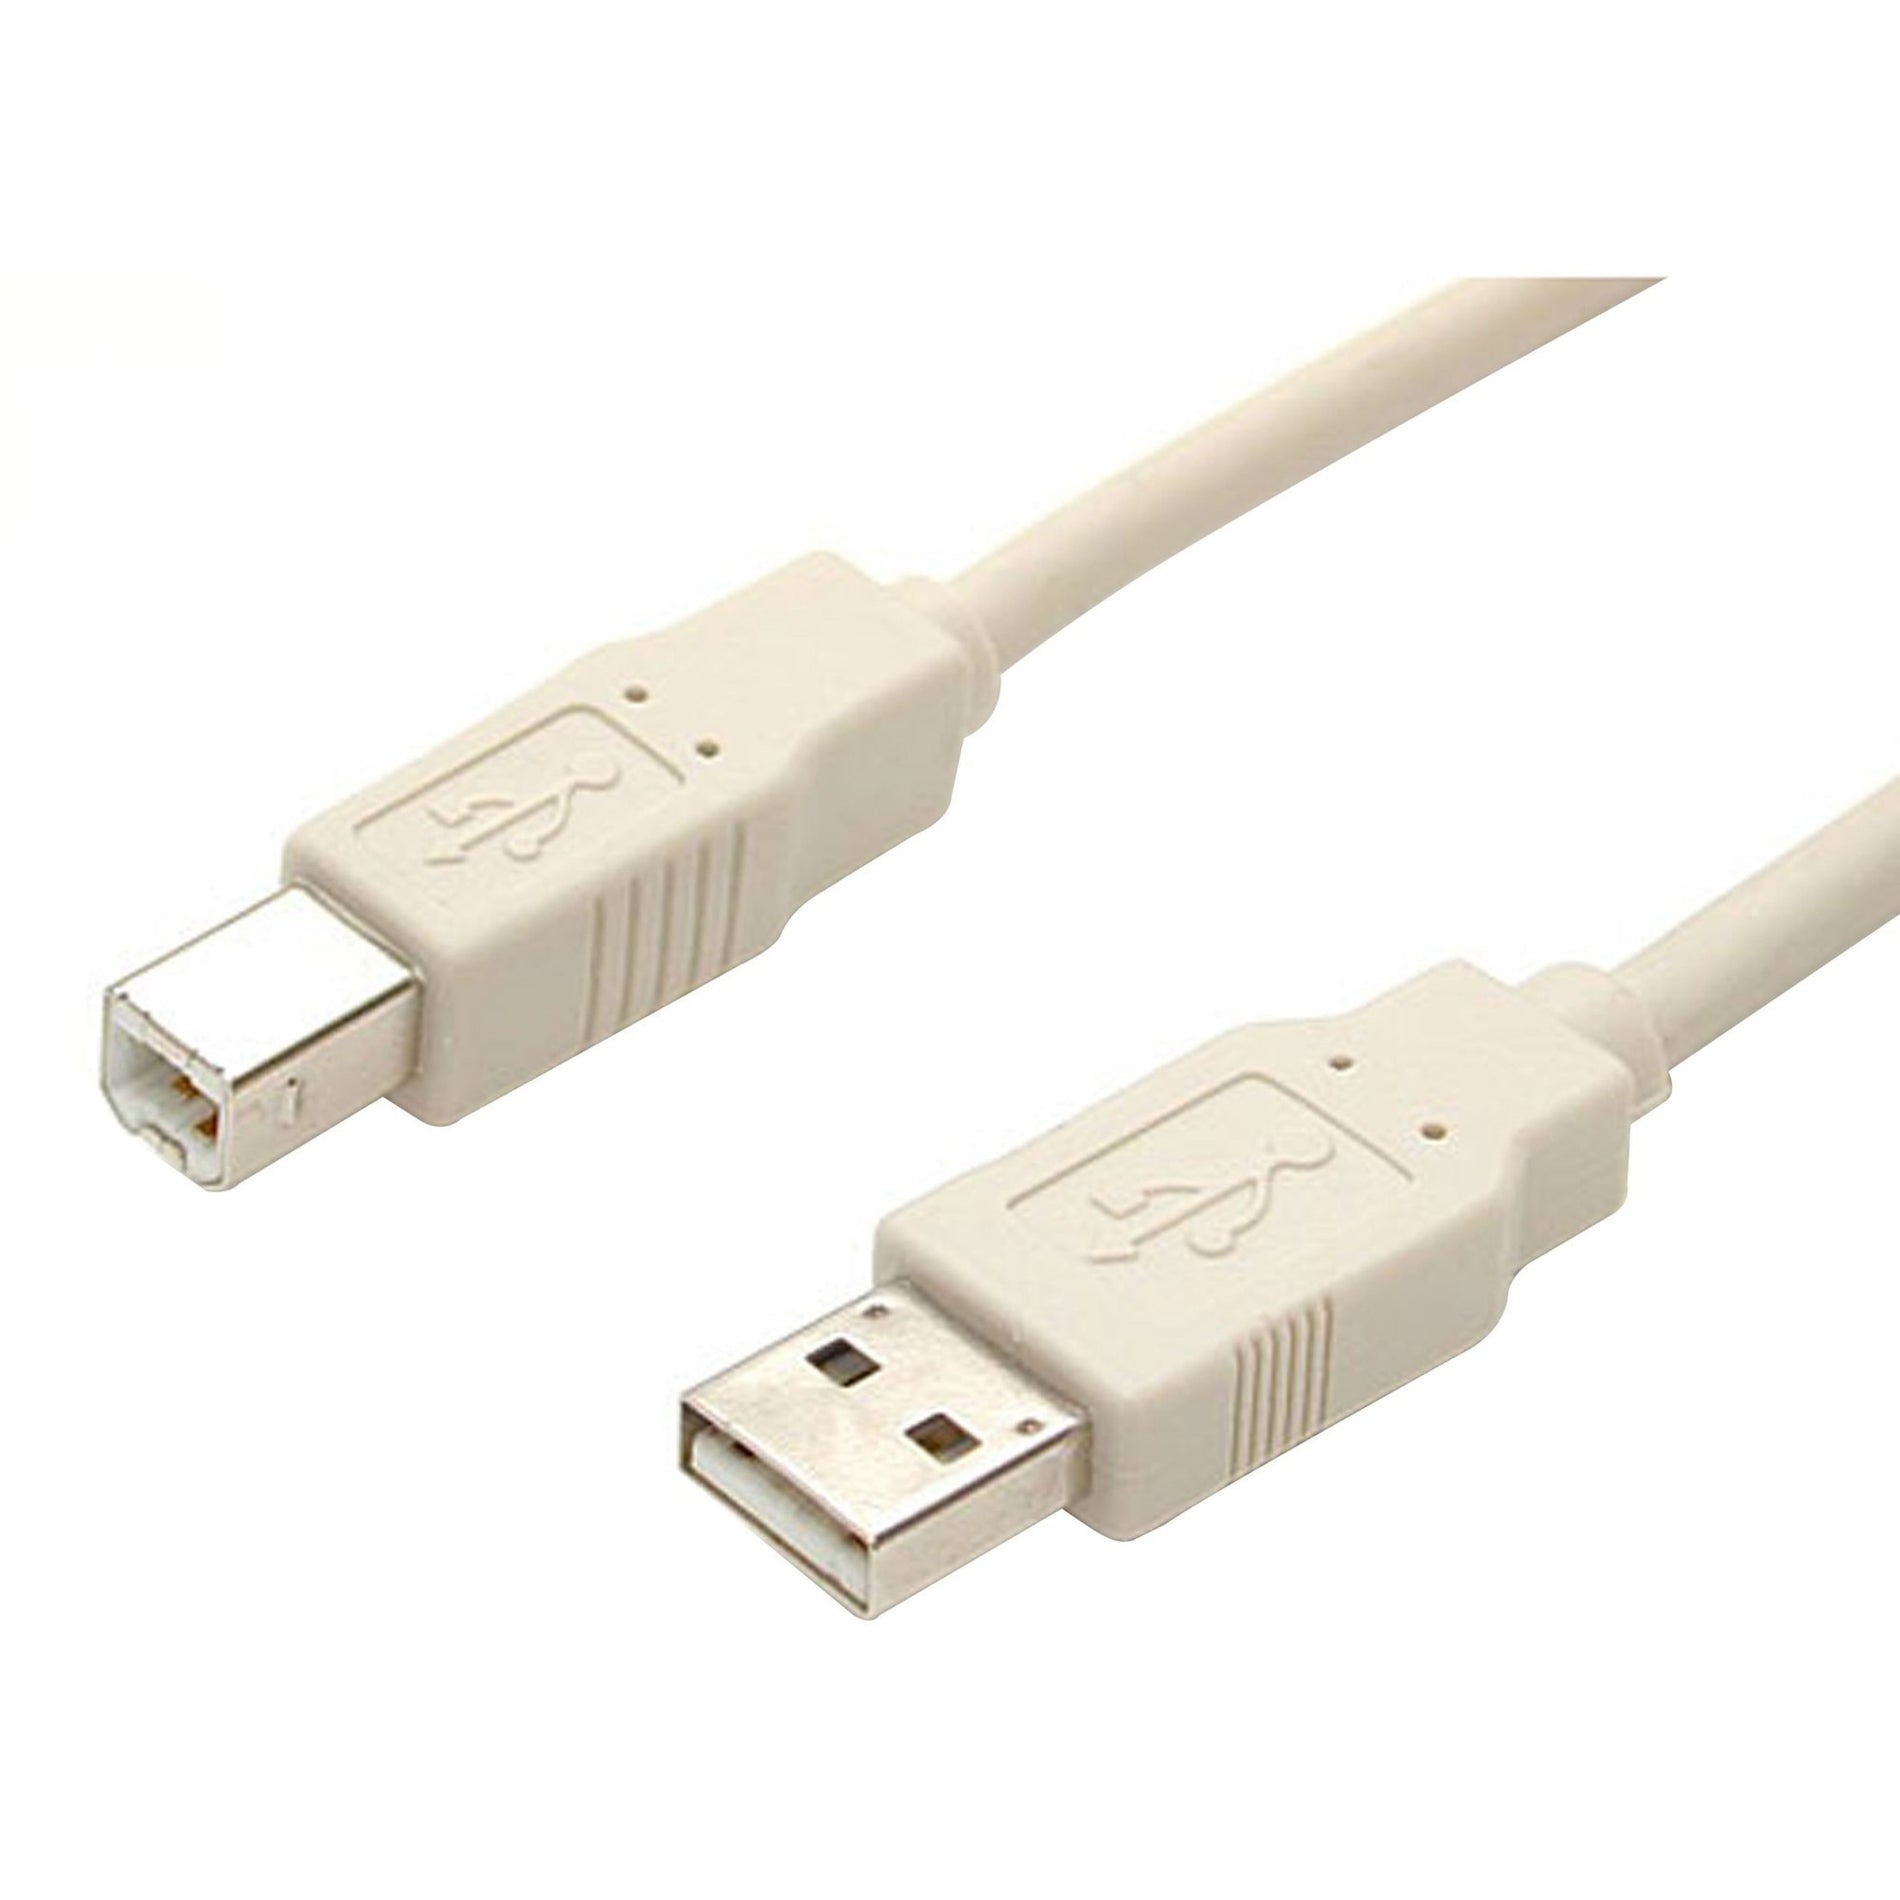 StarTech.com USBFAB_15 Beige USB 2.0 cable - 15 ft, Fully Rated Data Transfer Cable